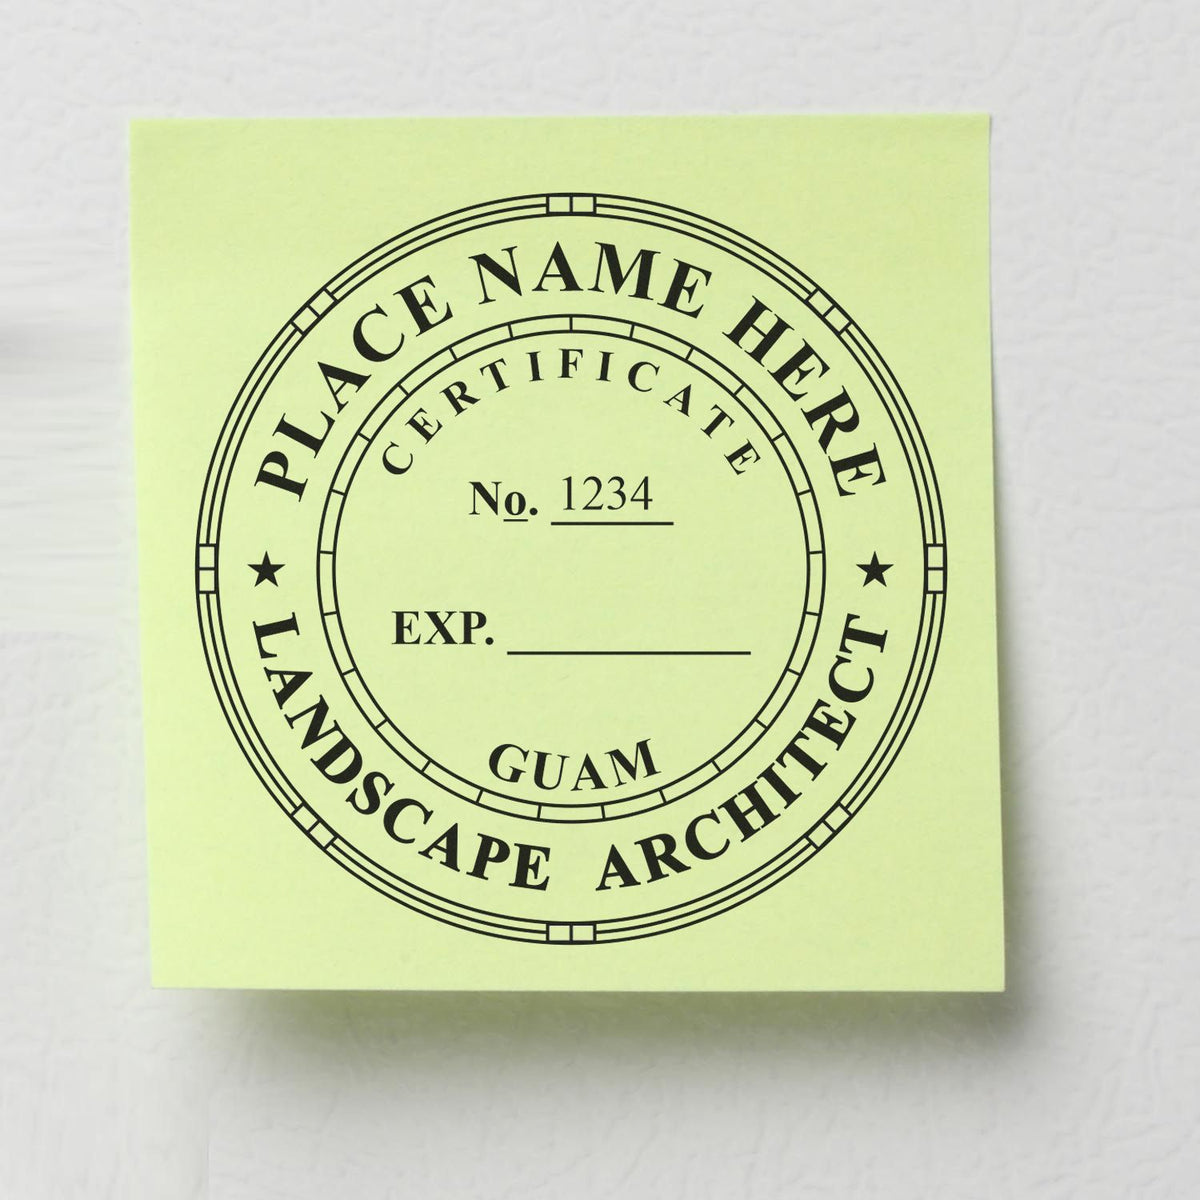 This paper is stamped with a sample imprint of the Guam Landscape Architectural Seal Stamp, signifying its quality and reliability.